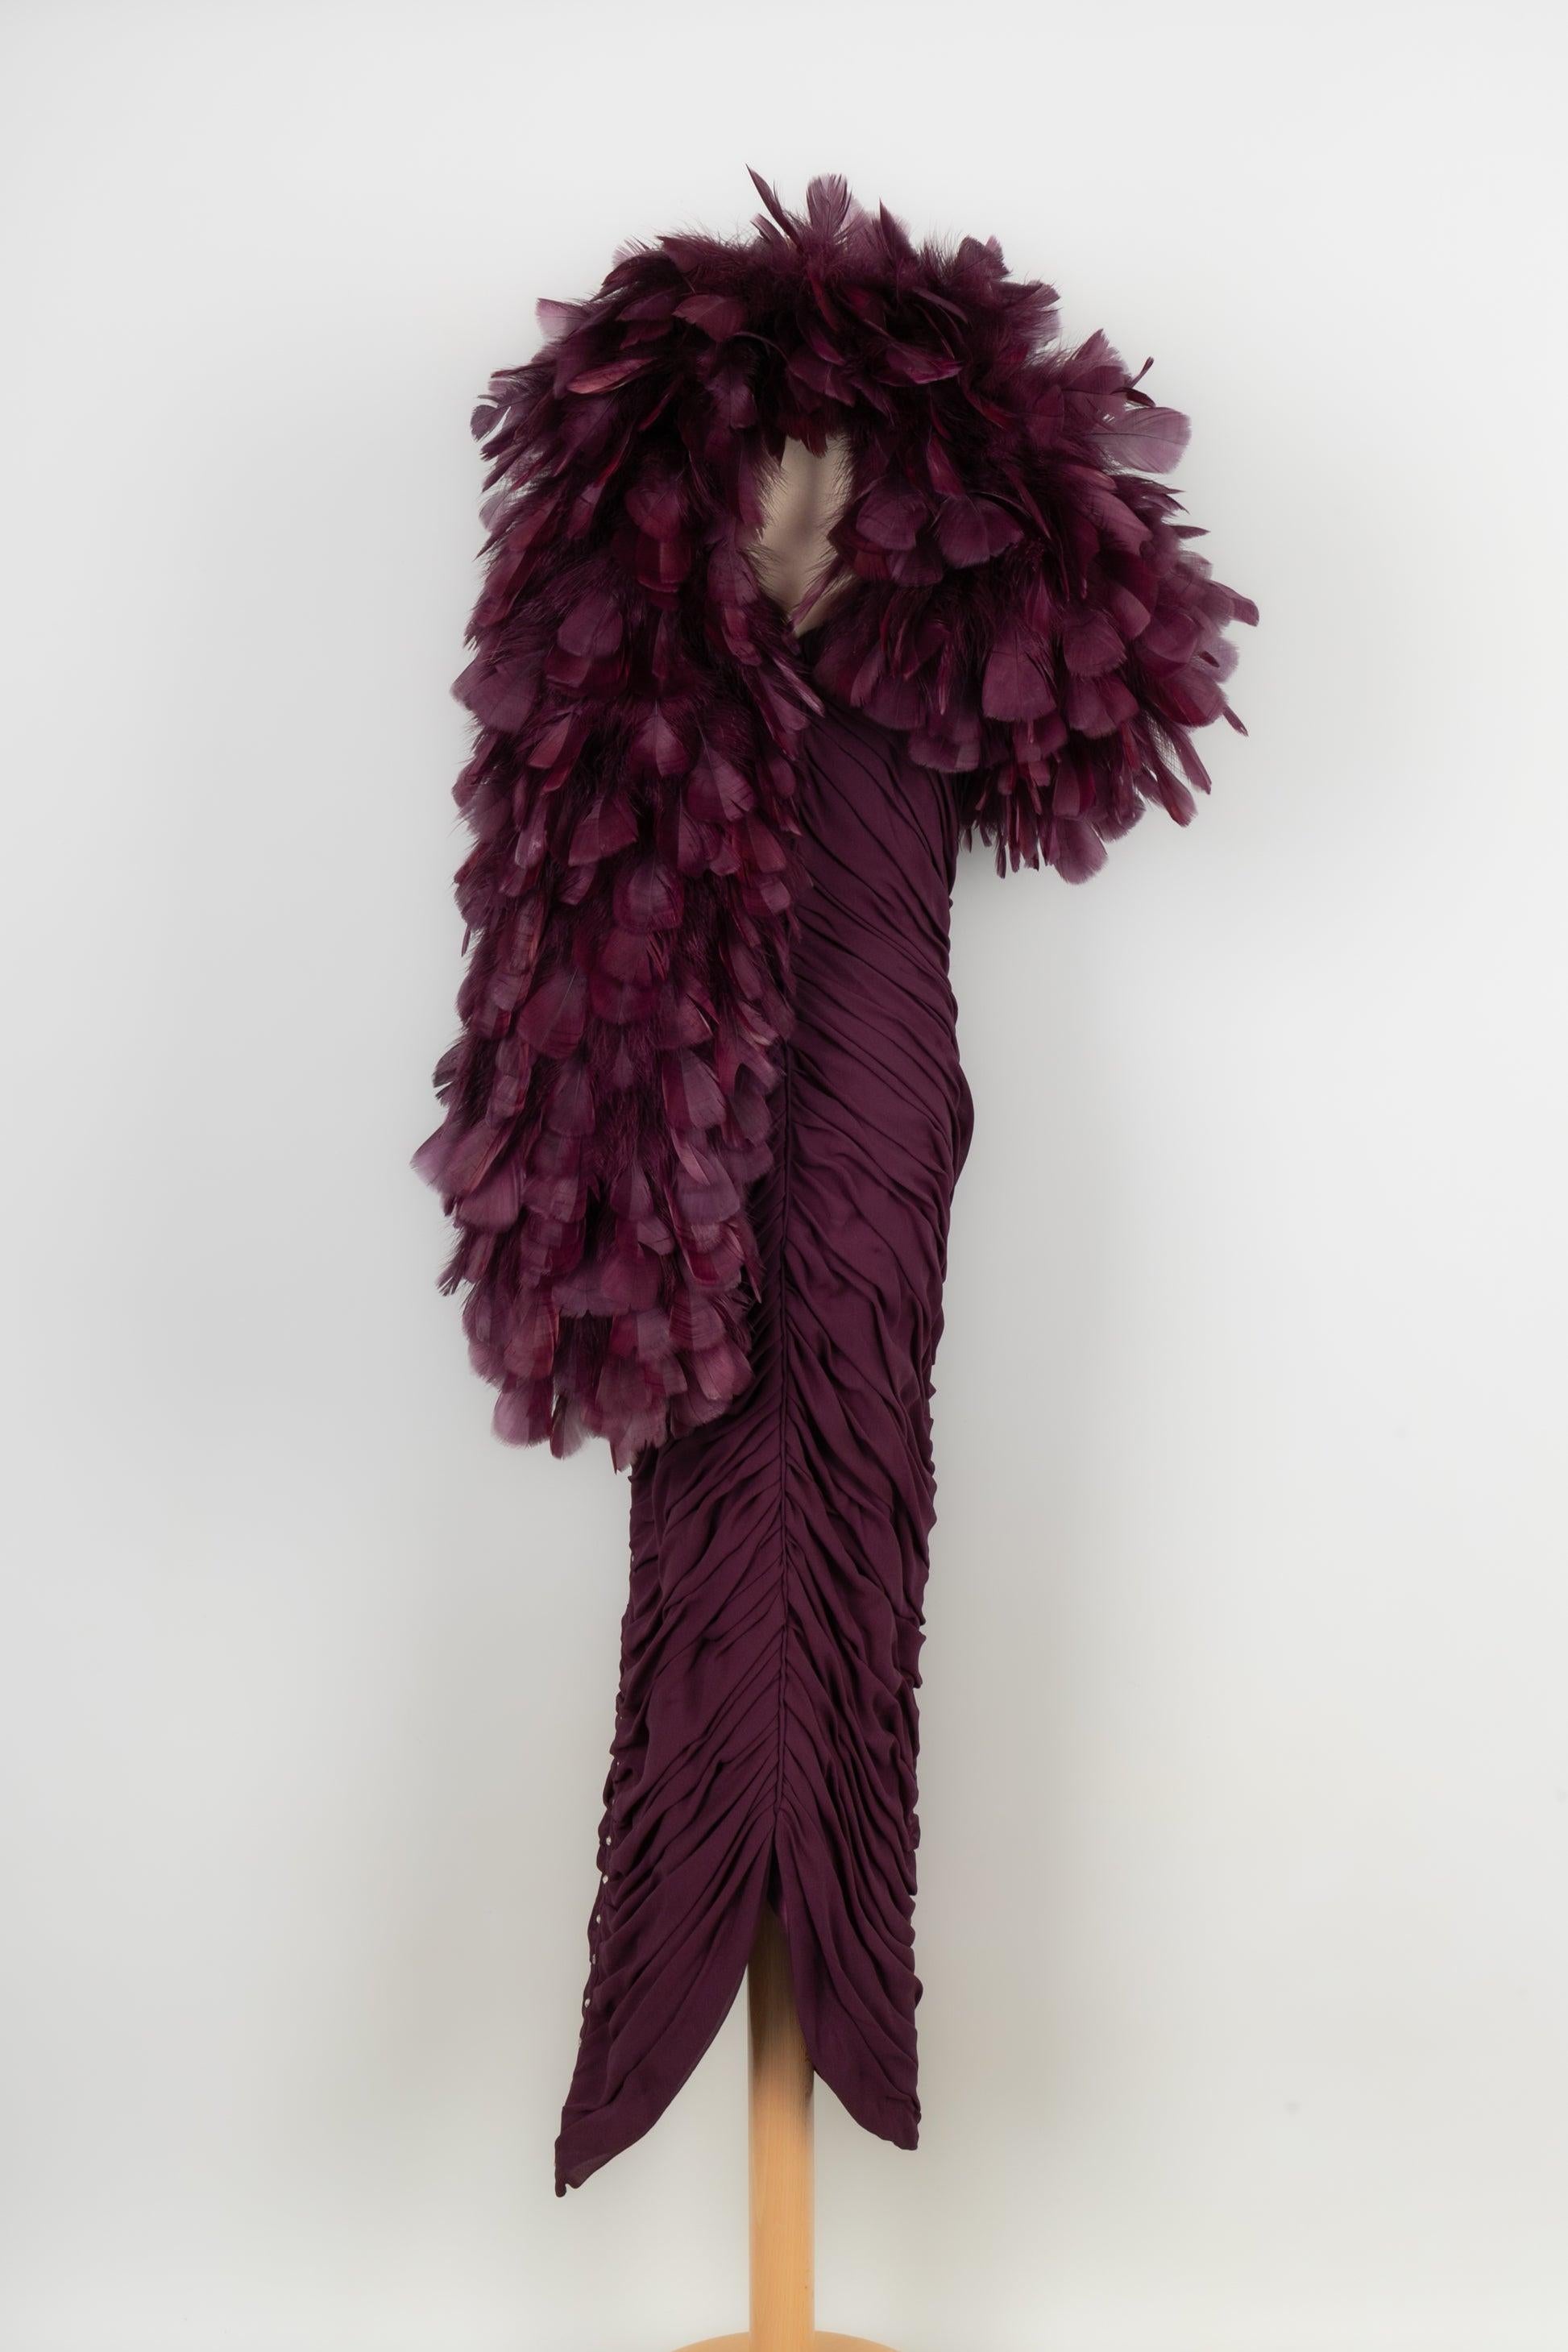 Anne-Marie Beretta - Georgette crepe evening dress with purple glossy feathers. Fall-Winter 1985-86 Ready-to-Wear Collection. No size nor composition label, it fits a 36FR.

Additional information:
Condition: Very good condition
Dimensions: Chest: